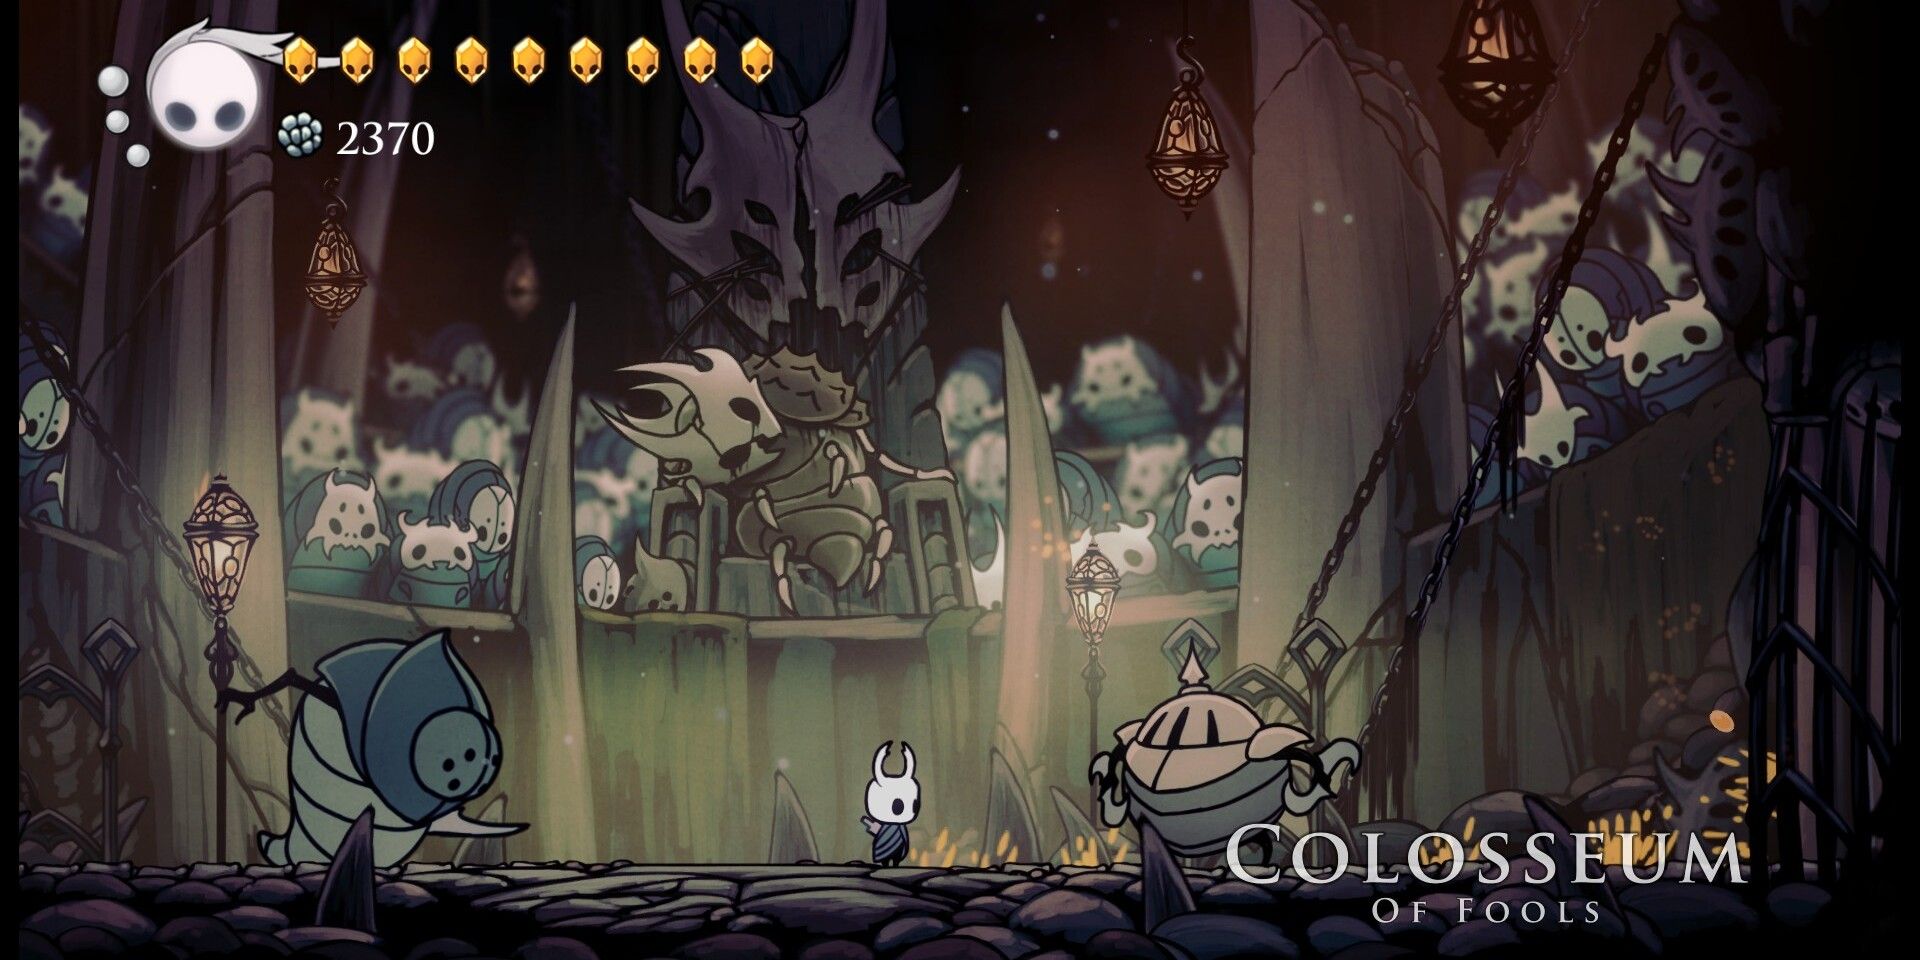 effects of all the charms hollow knight